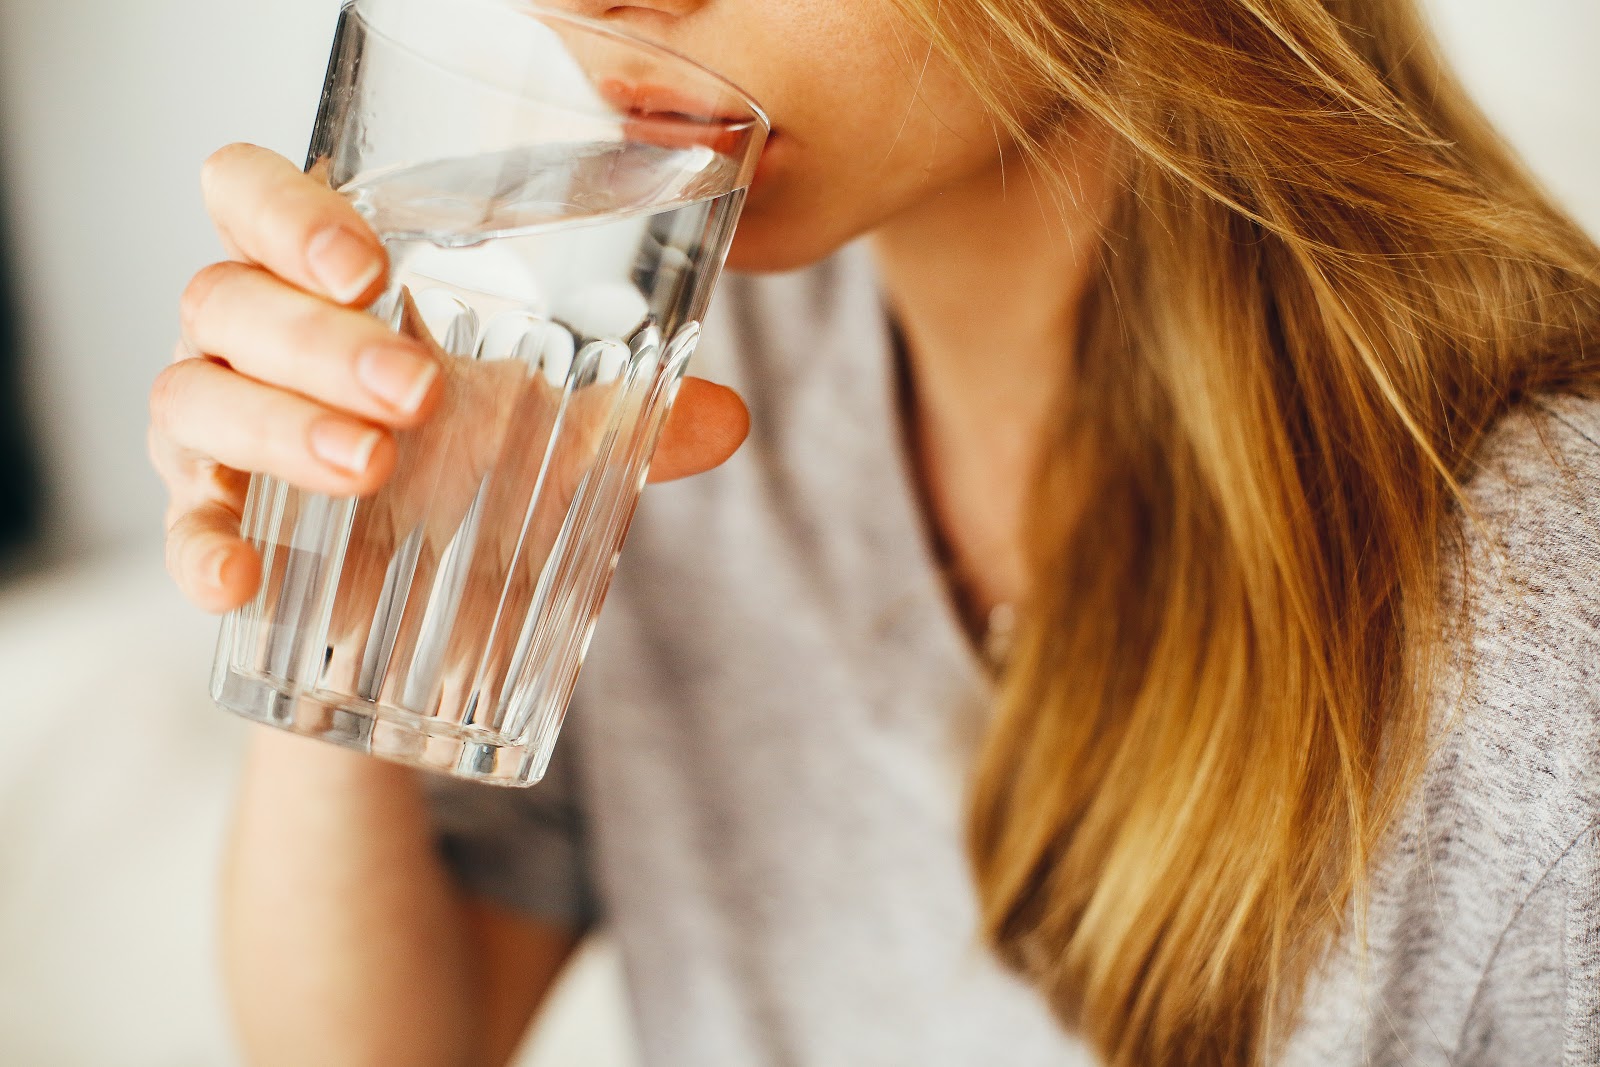 Woman drinking water out of a clear glass.